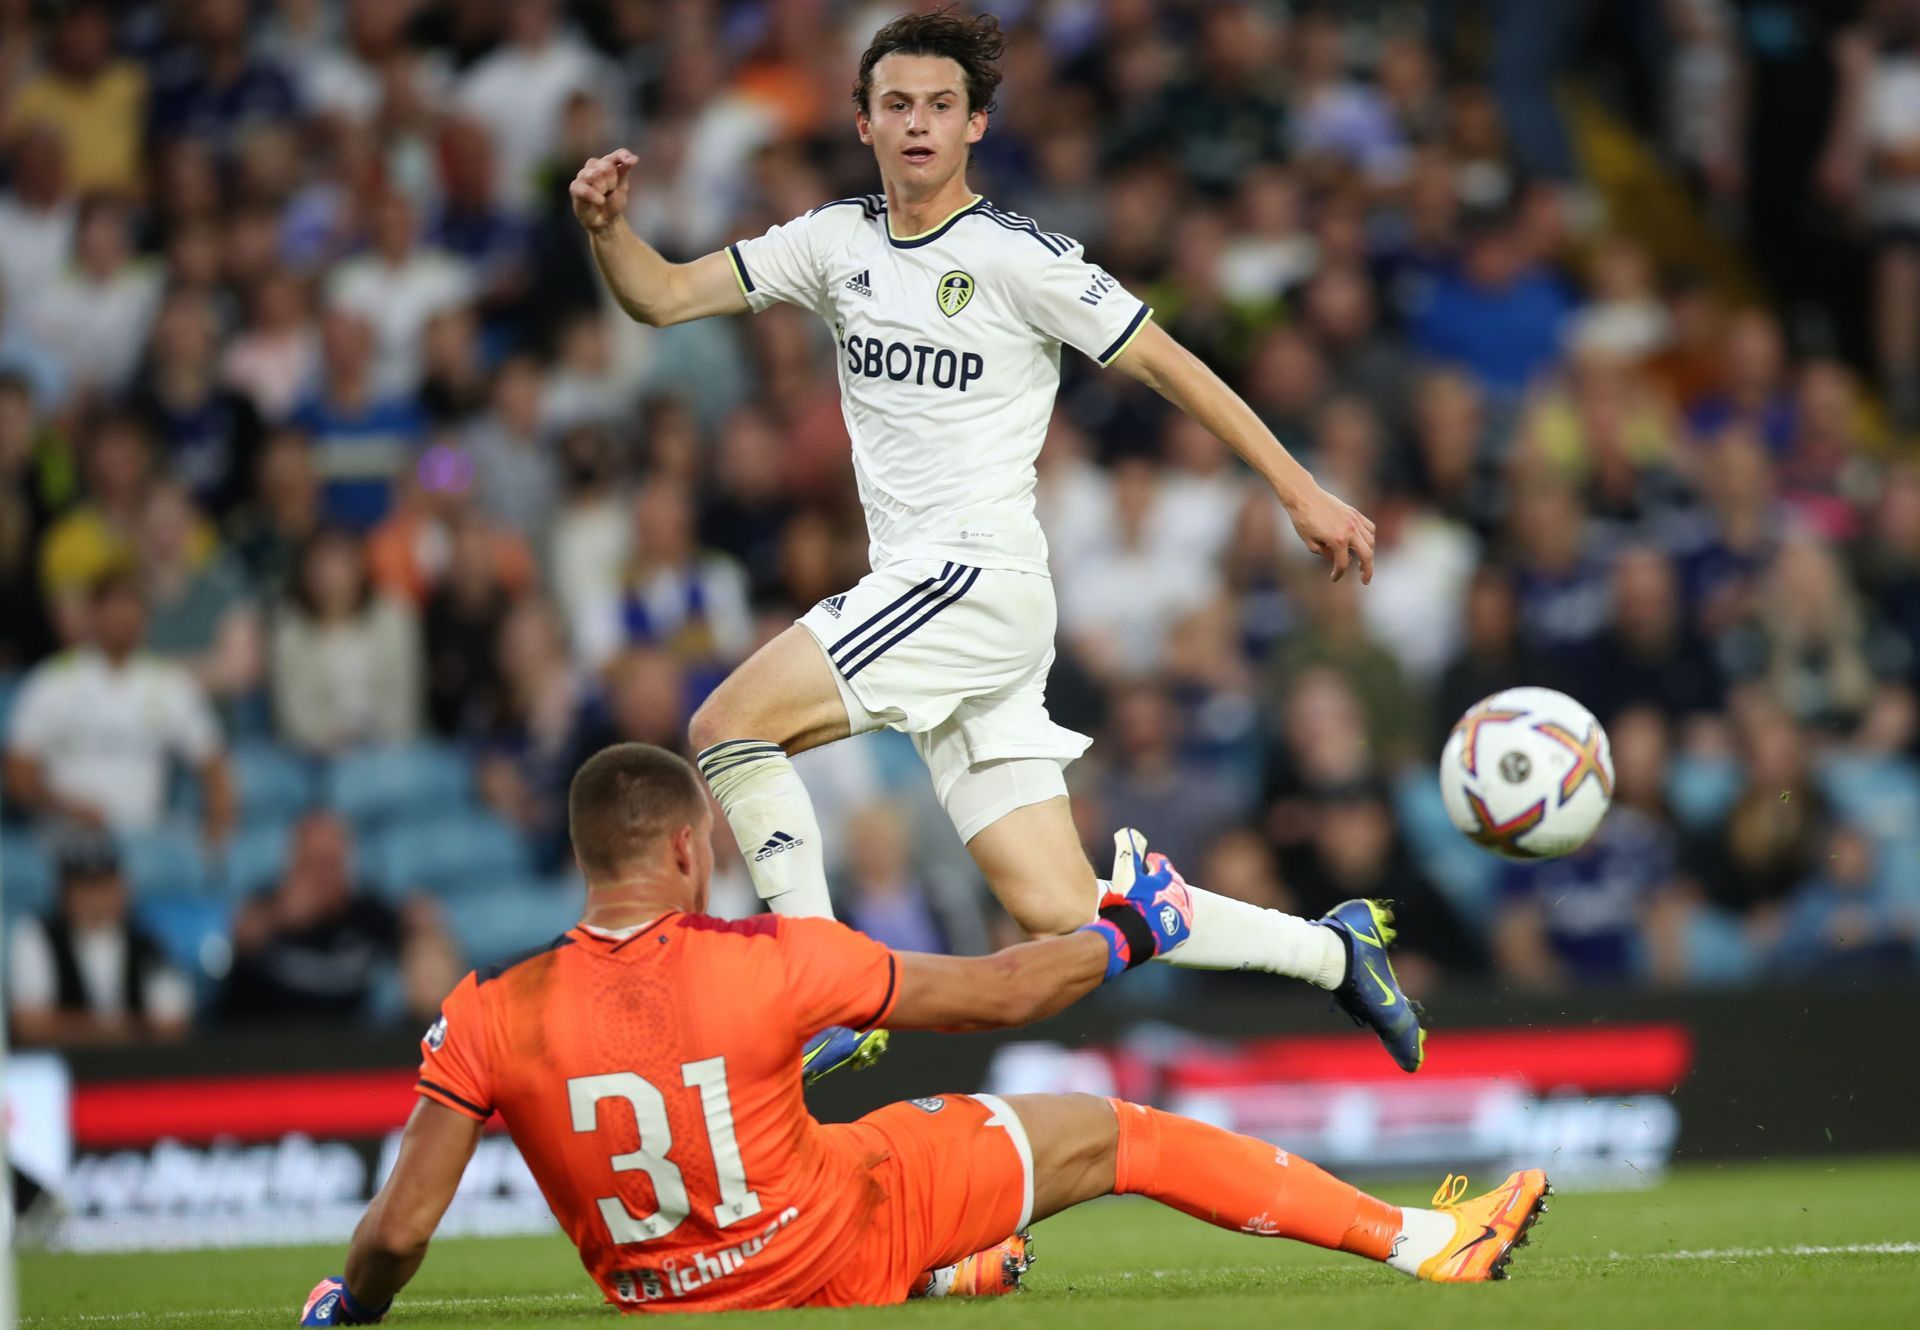 Brenden Aaronson in action for Leeds United ahead of the Premier League season.